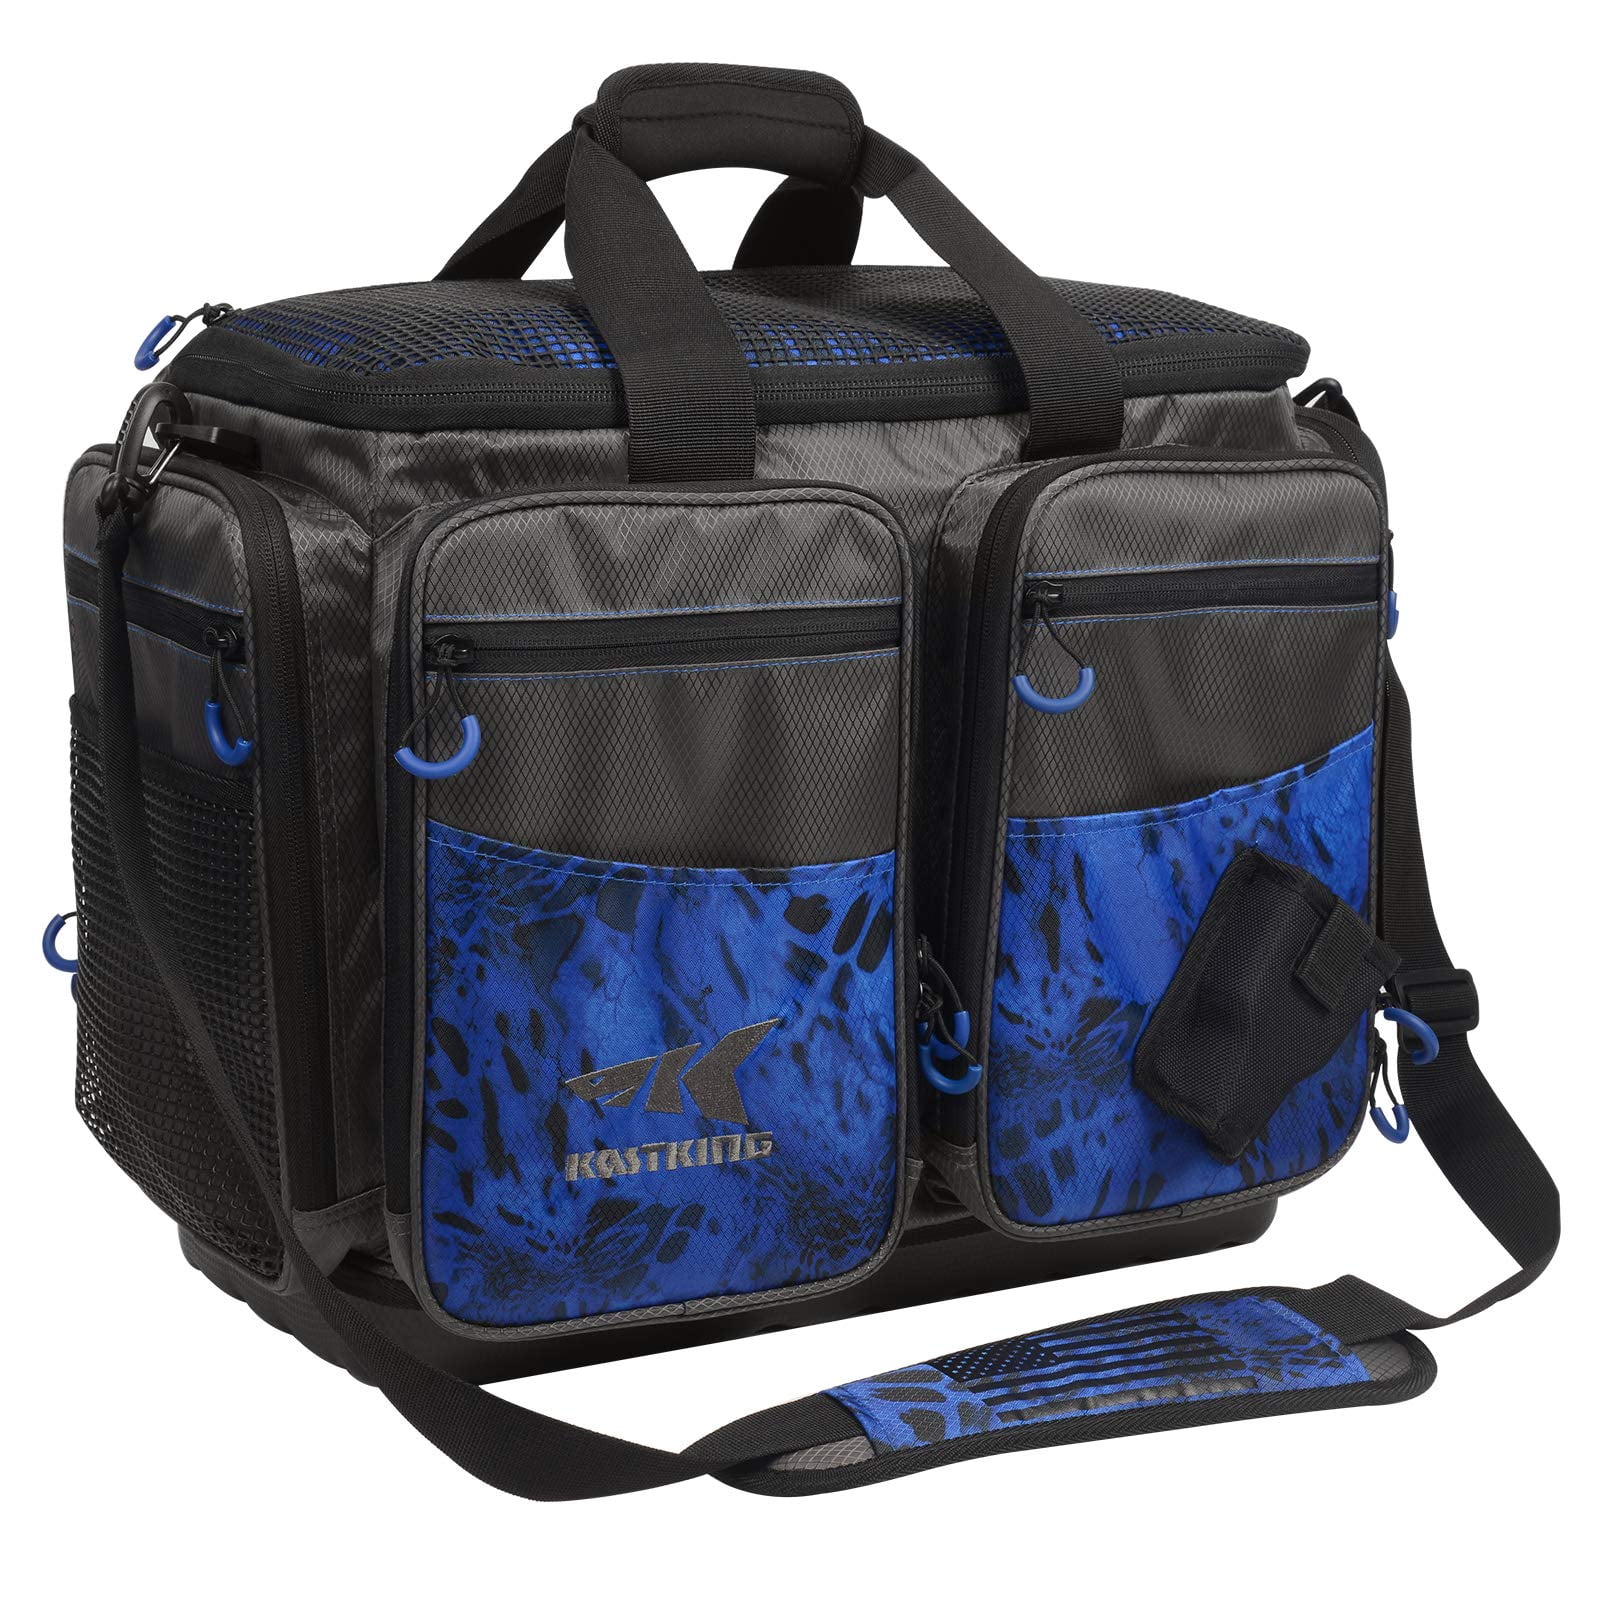 All-in-One Waterproof Electronics Accessories Travel Organizer Bag –  Soroamor Innovative Products